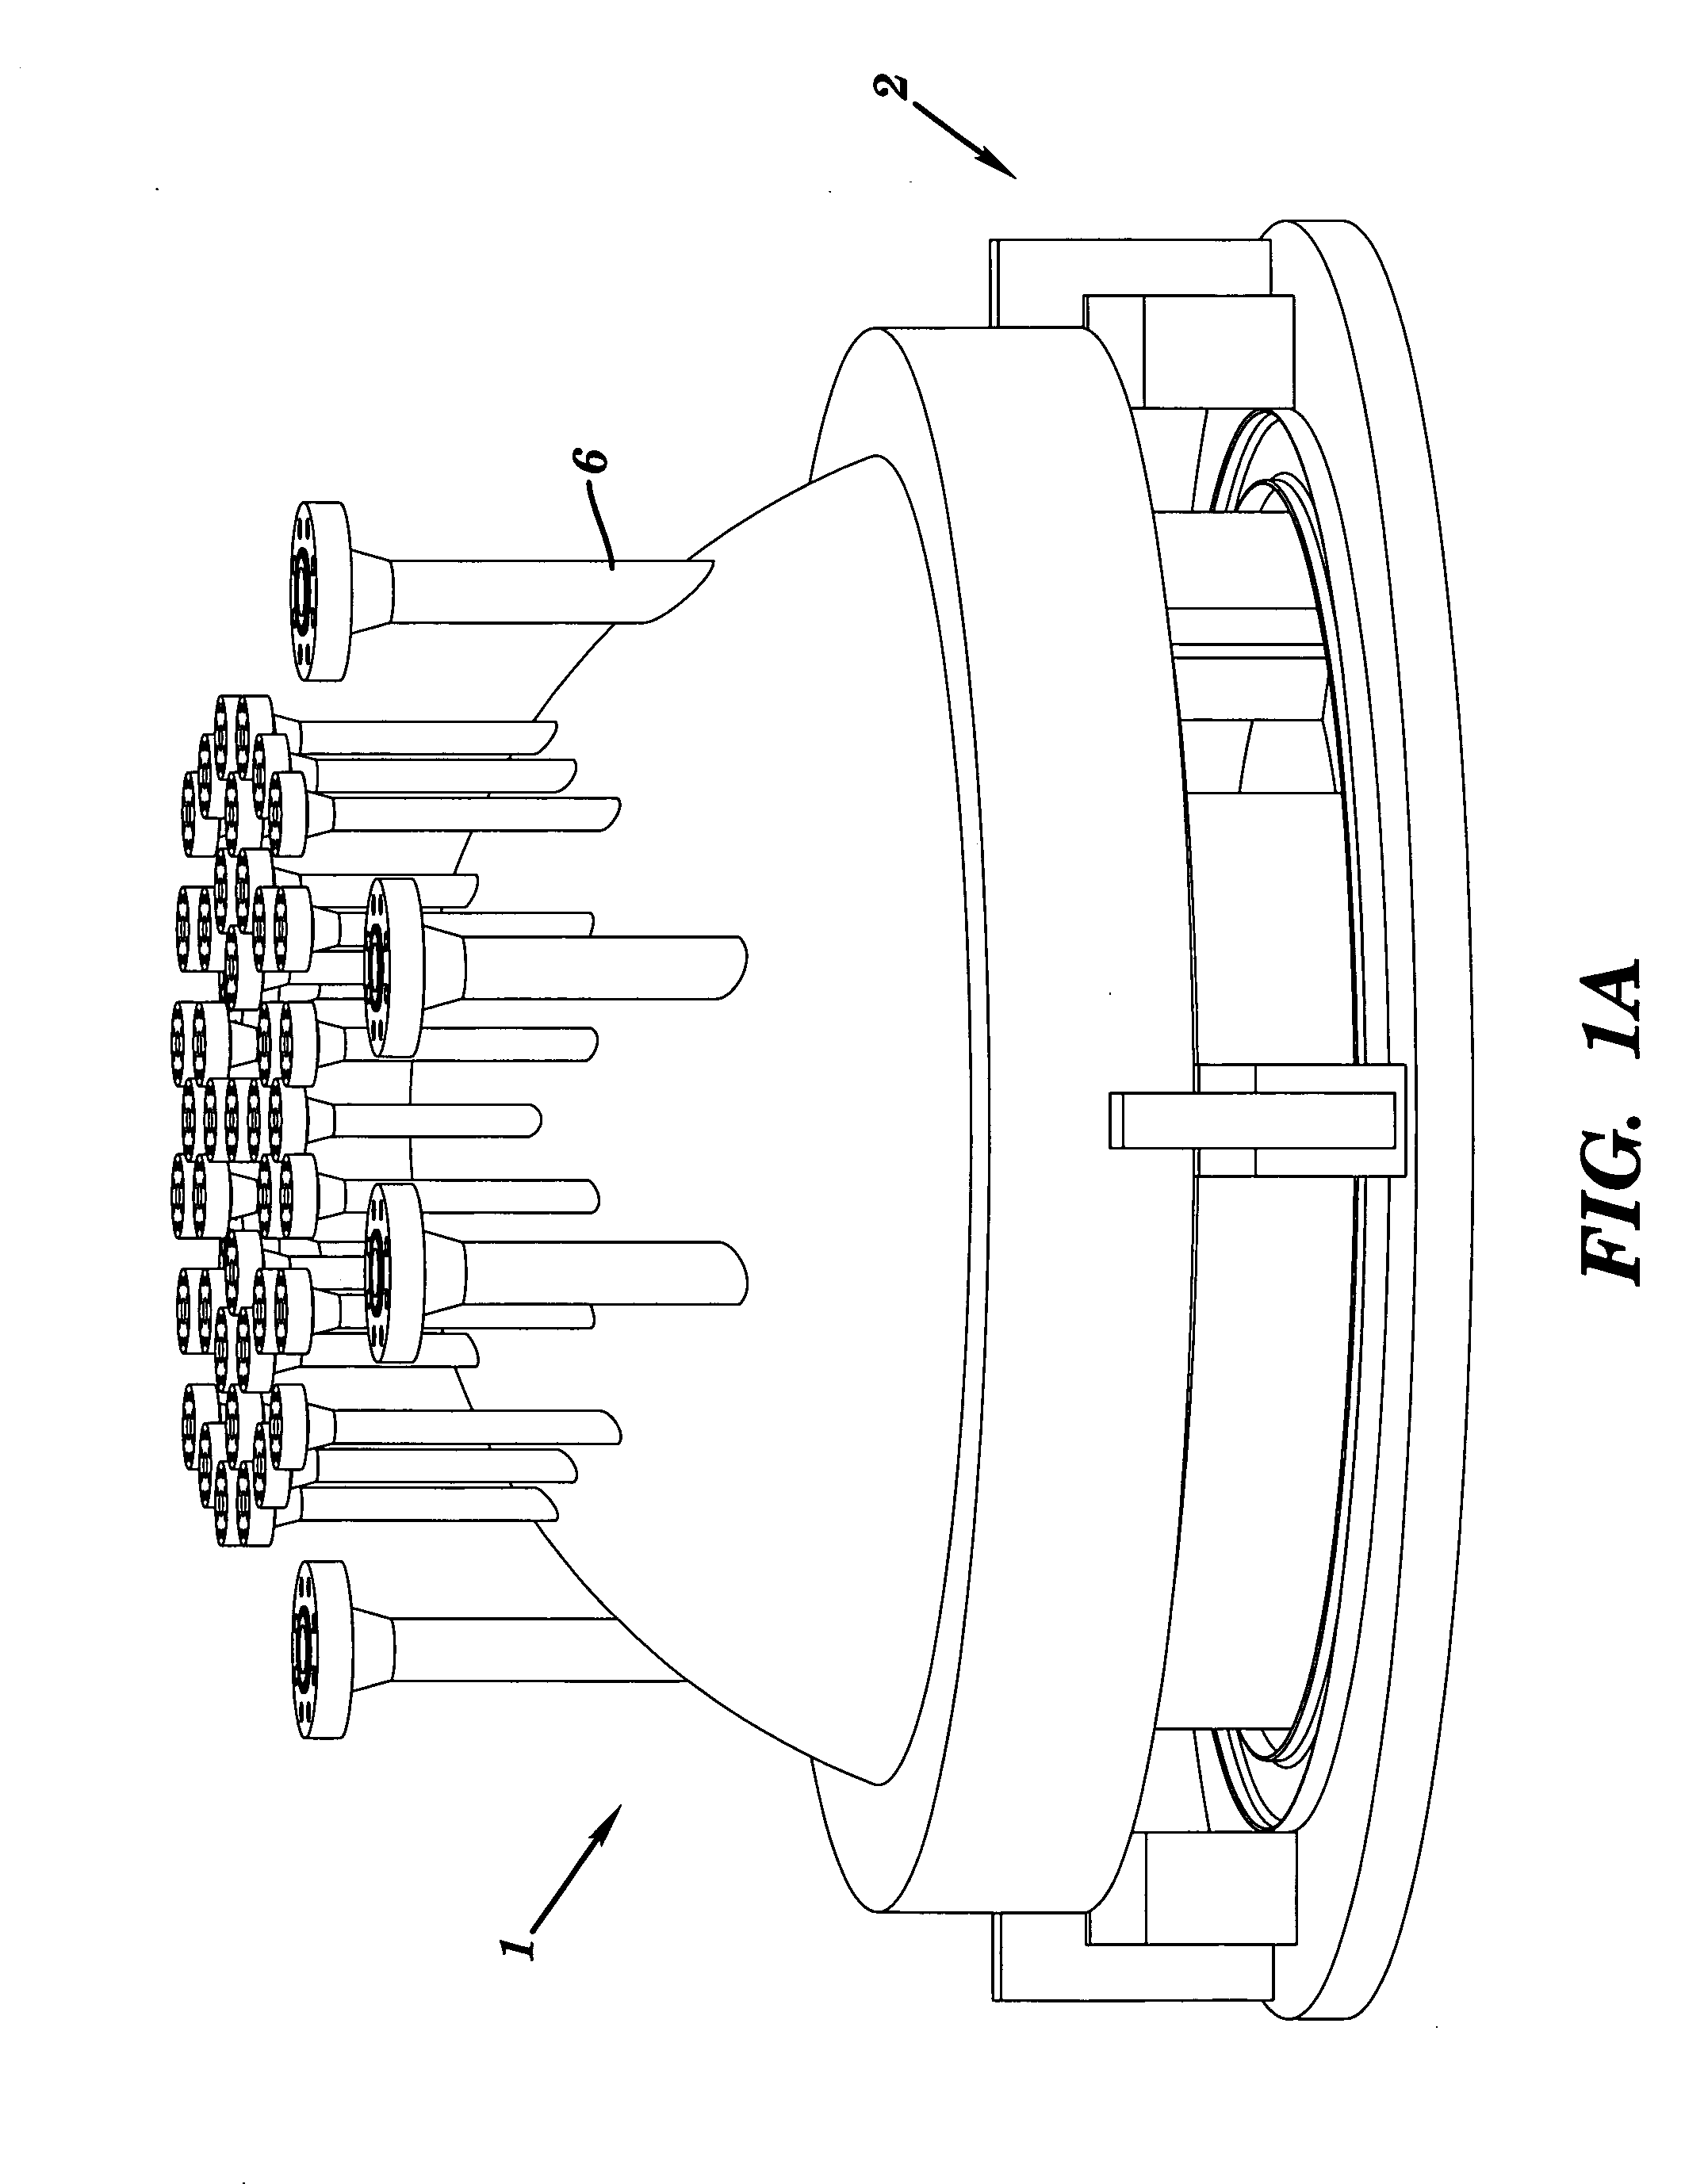 Method and apparatus for inspection of reactor head components